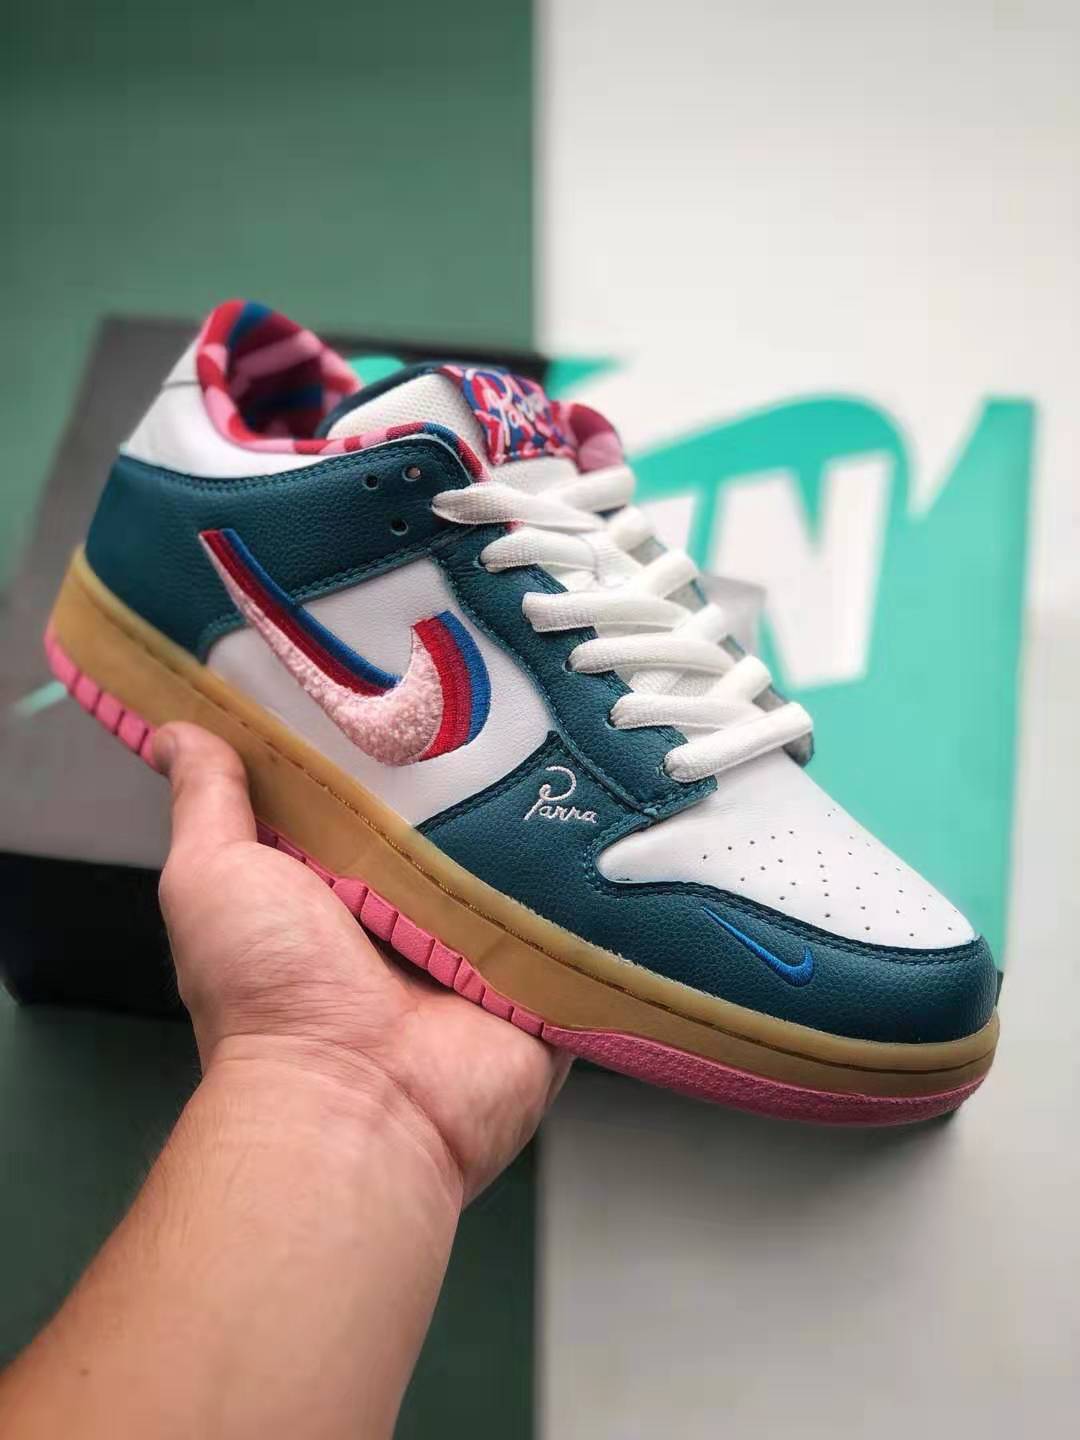 Parra x Nike SB Dunk Low: White/Dark Green/Red CN4504-105 Limited Edition!